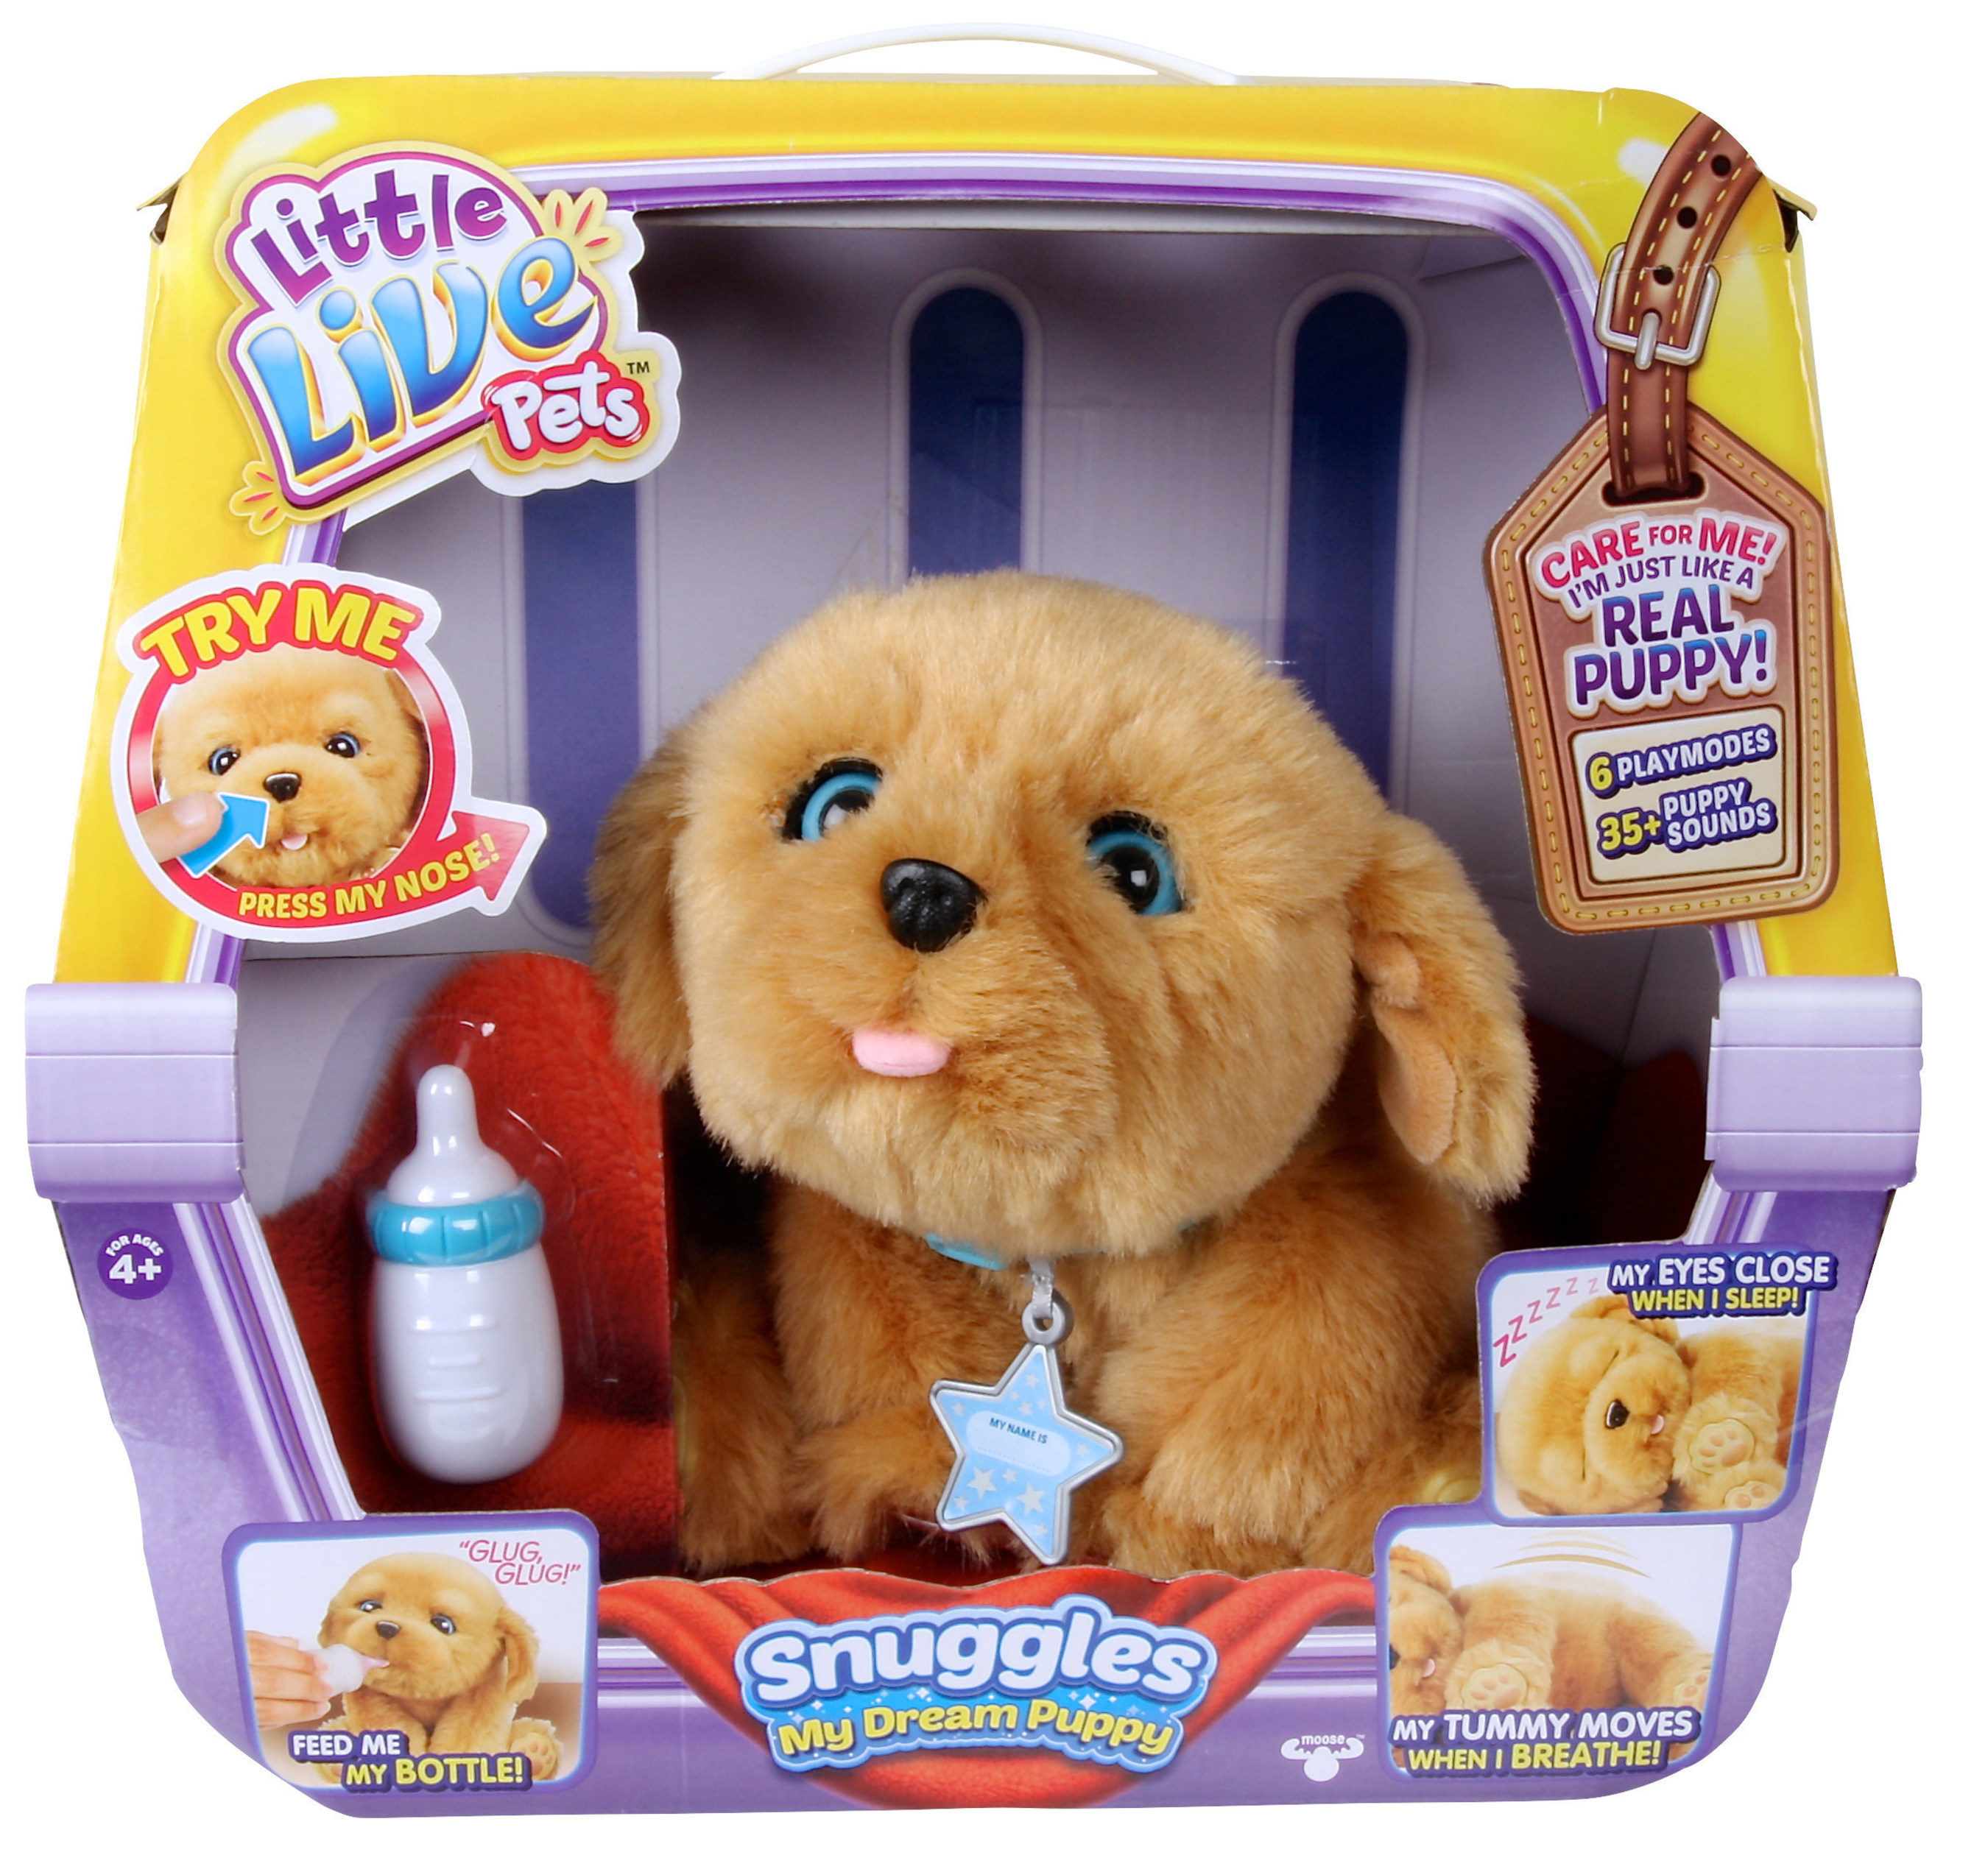 Moose Toys led the season's top trends, including electronic pets with Little Live Pets Snuggles My Dream Puppy, which melts the hearts of kids and adults alike.